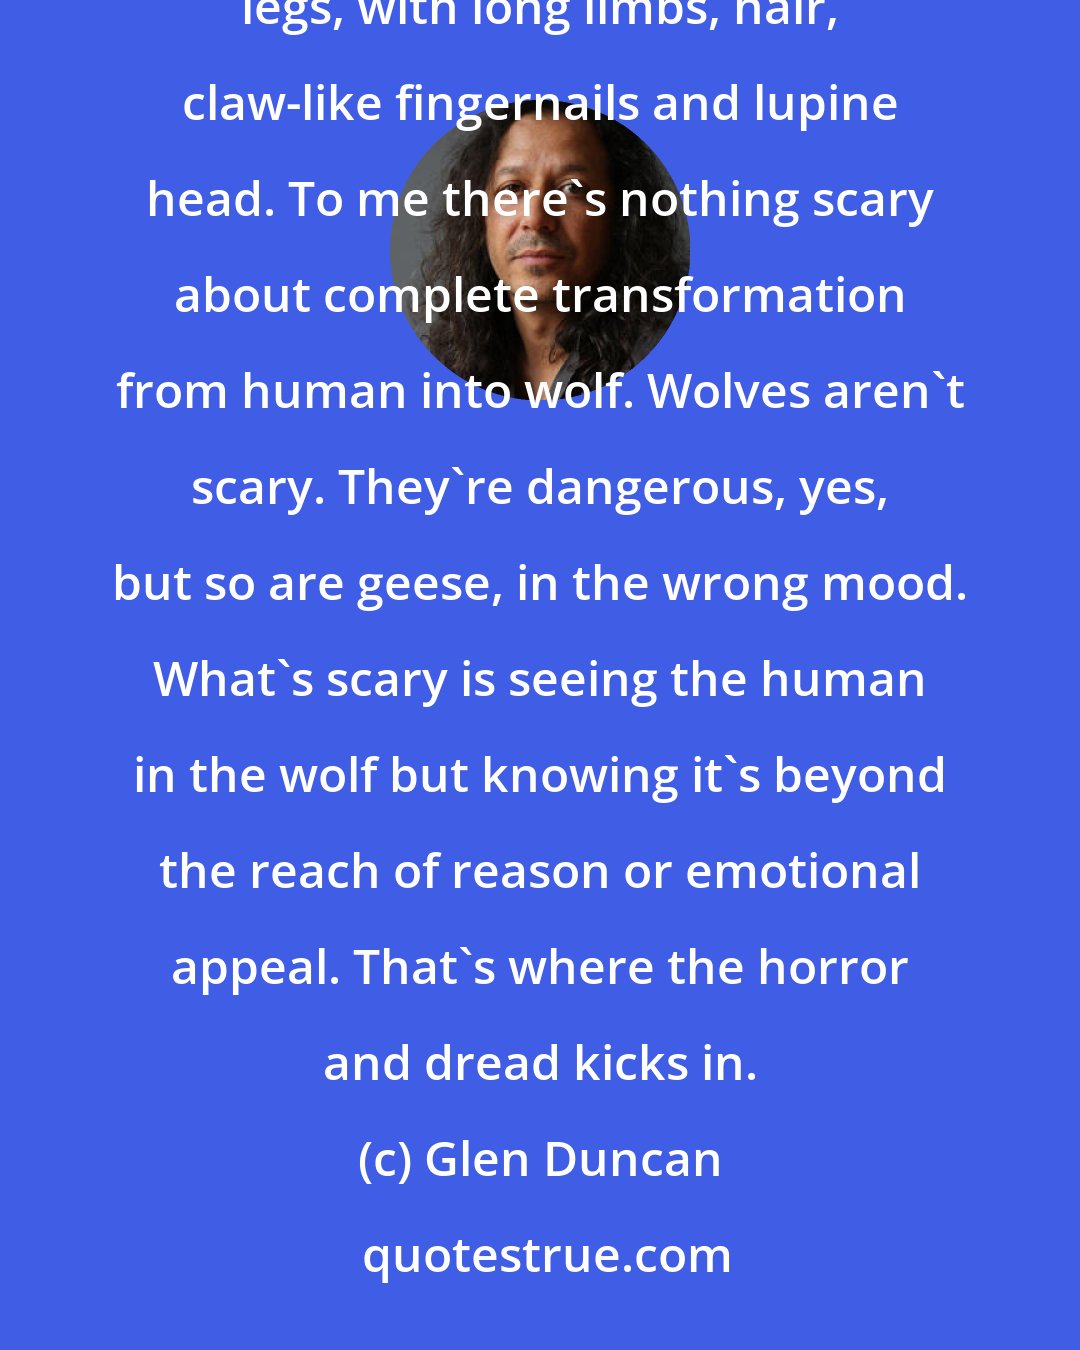 Glen Duncan: I don't remember the first image of a werewolf I saw, but I suspect it was the hybrid type, up on two legs, with long limbs, hair, claw-like fingernails and lupine head. To me there's nothing scary about complete transformation from human into wolf. Wolves aren't scary. They're dangerous, yes, but so are geese, in the wrong mood. What's scary is seeing the human in the wolf but knowing it's beyond the reach of reason or emotional appeal. That's where the horror and dread kicks in.